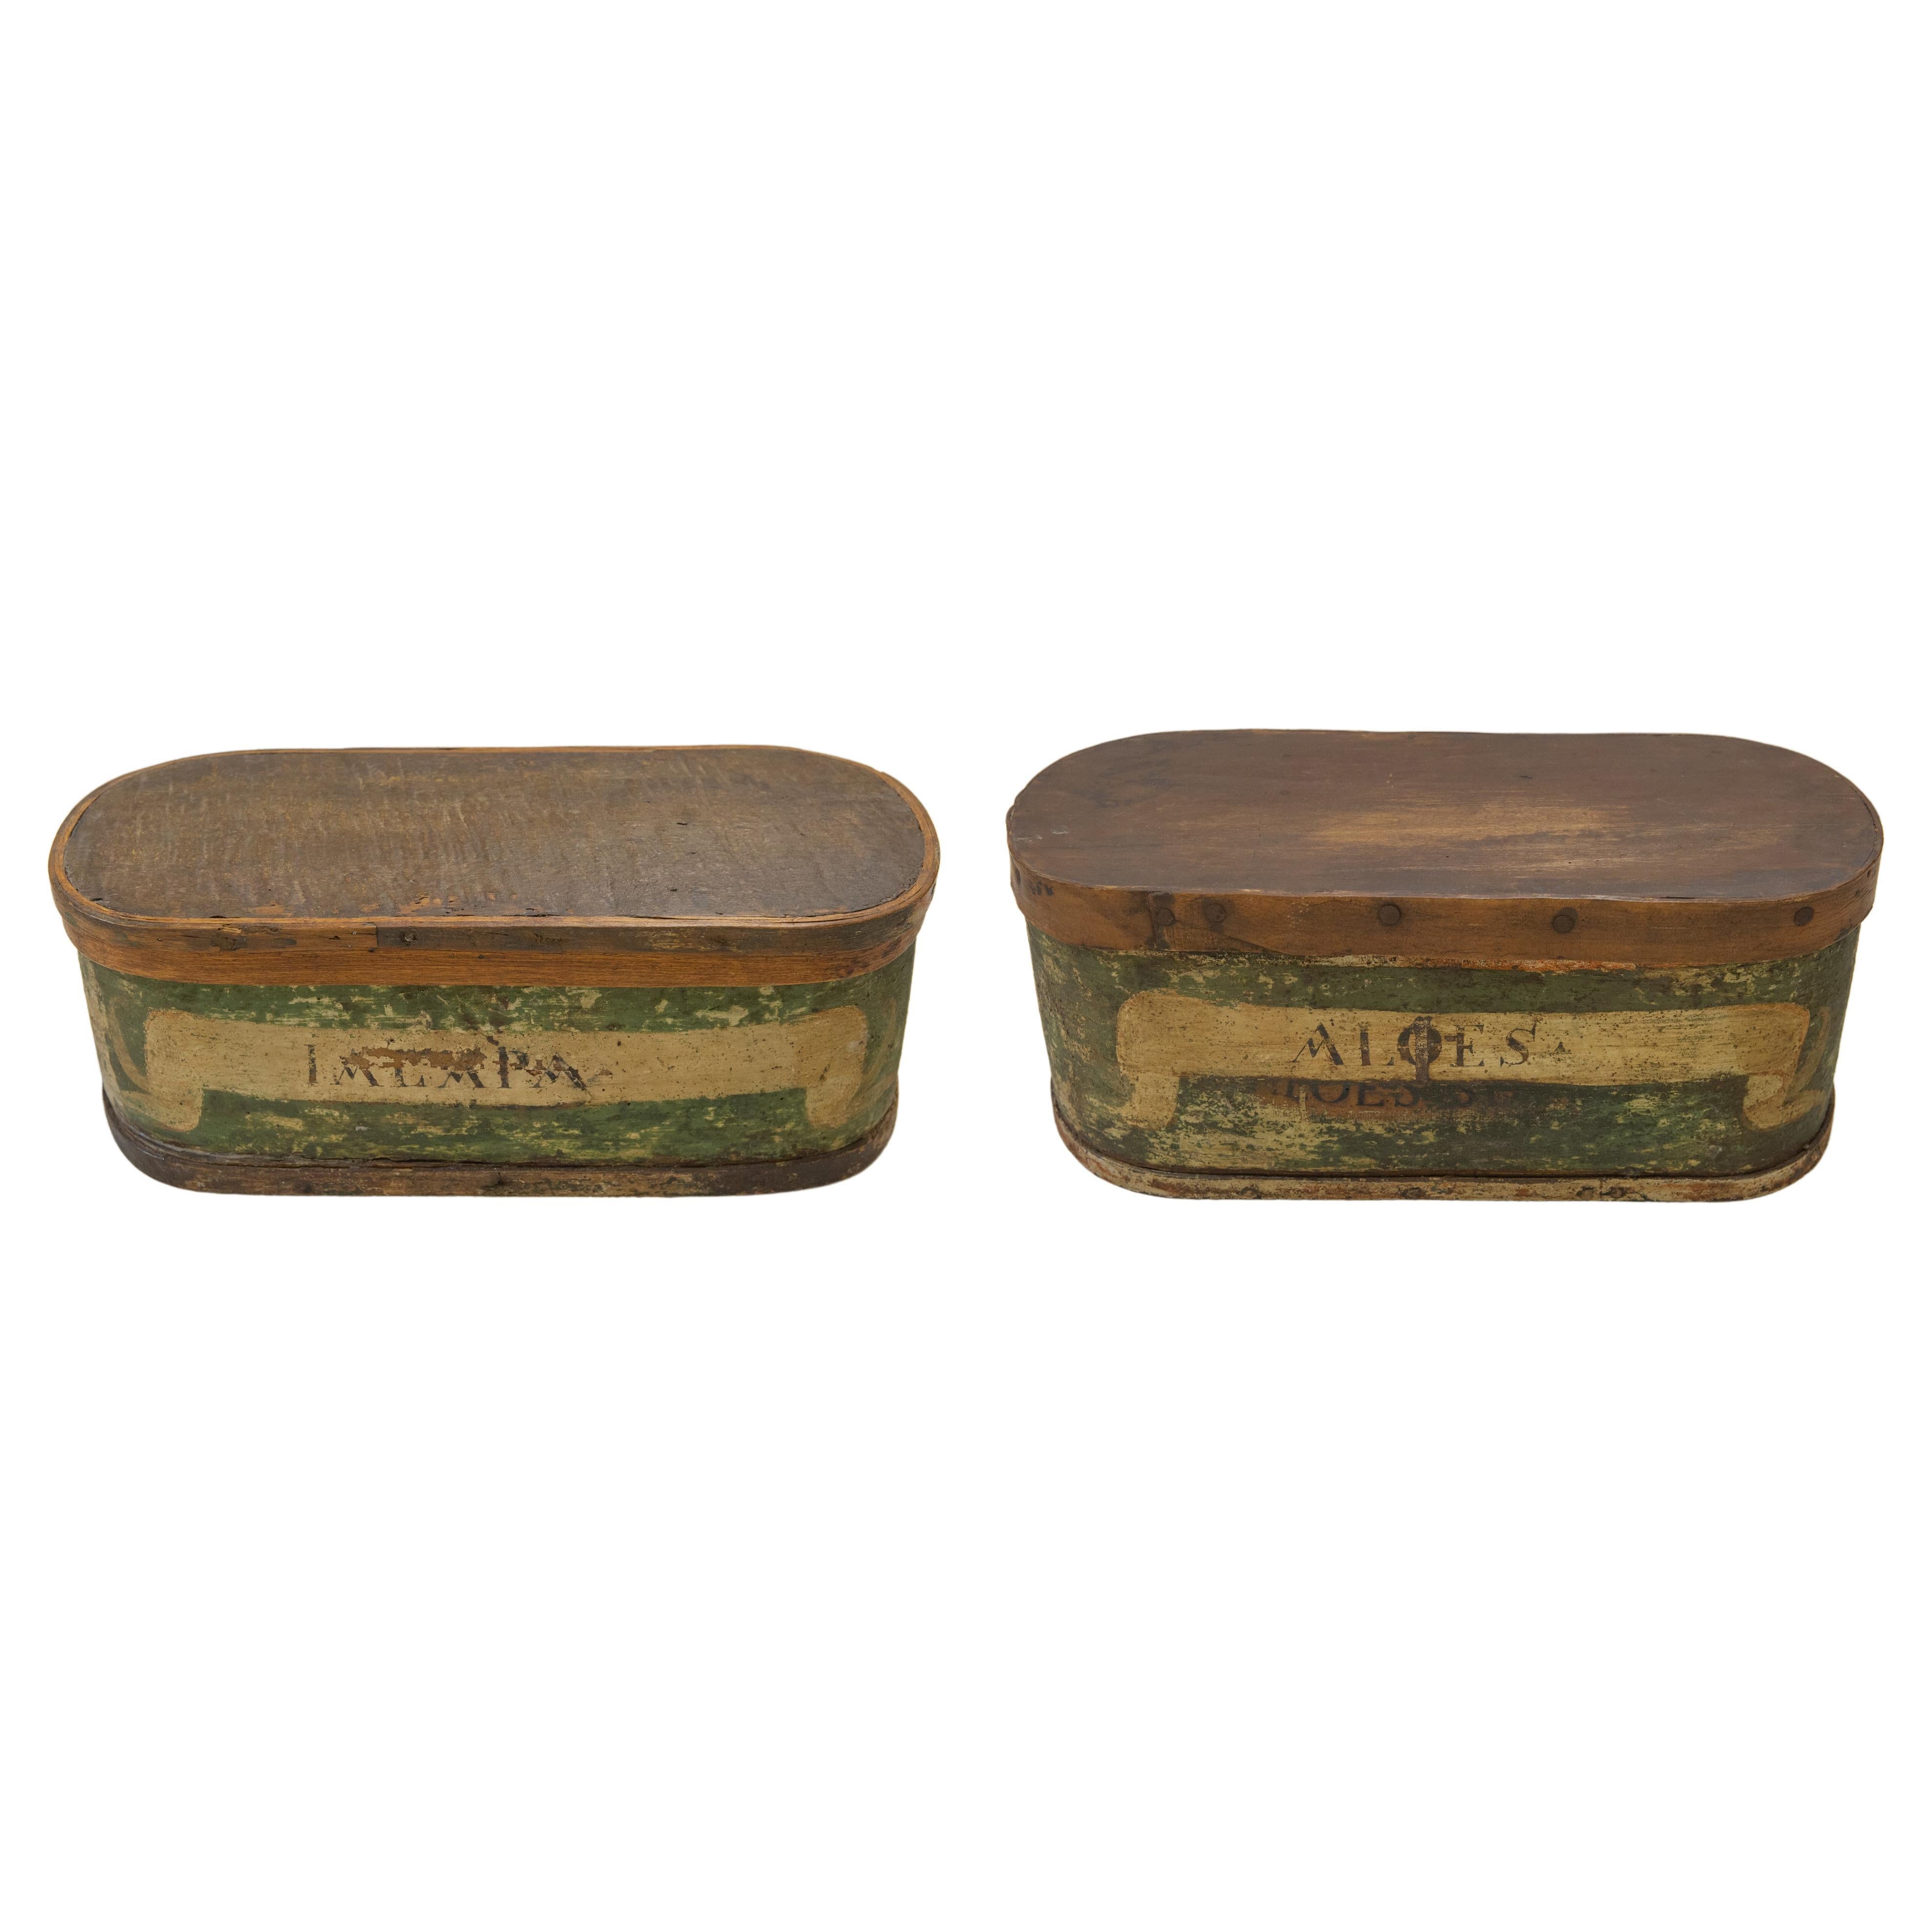 O/7417 - Pair of rare oval apothecary boxes with lettering: Aloes and Ialapa (may be Jalapeno - 
Slightly different sizes from each other (less than two cm. in hight) -
They are hand painted and are over 200 years old.
The price is interesting